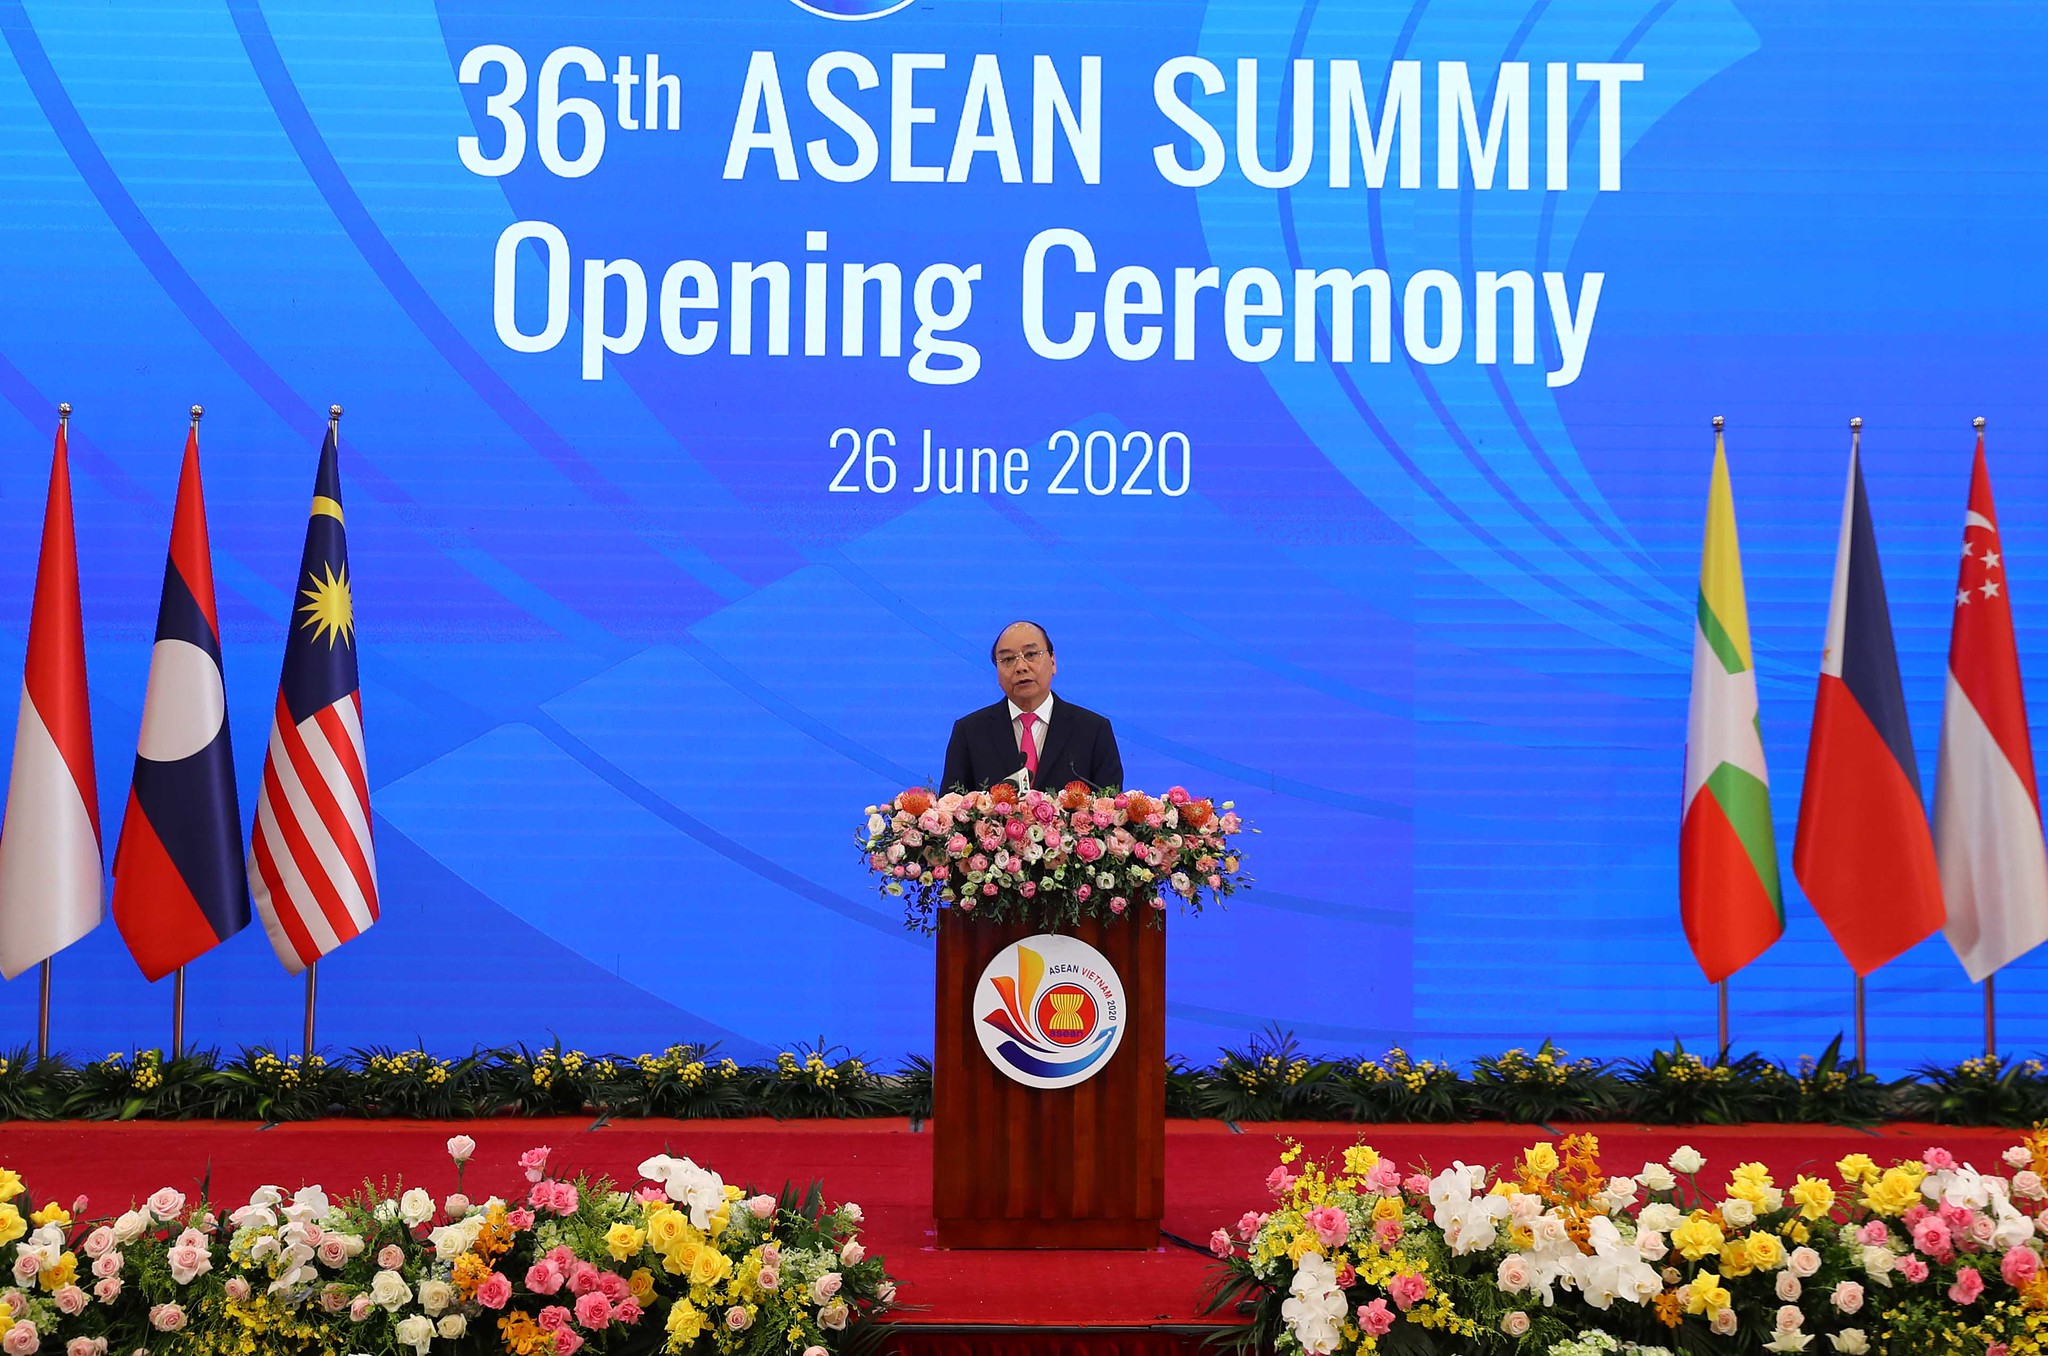 [June 29] The 36th Asean Summit held via video conference